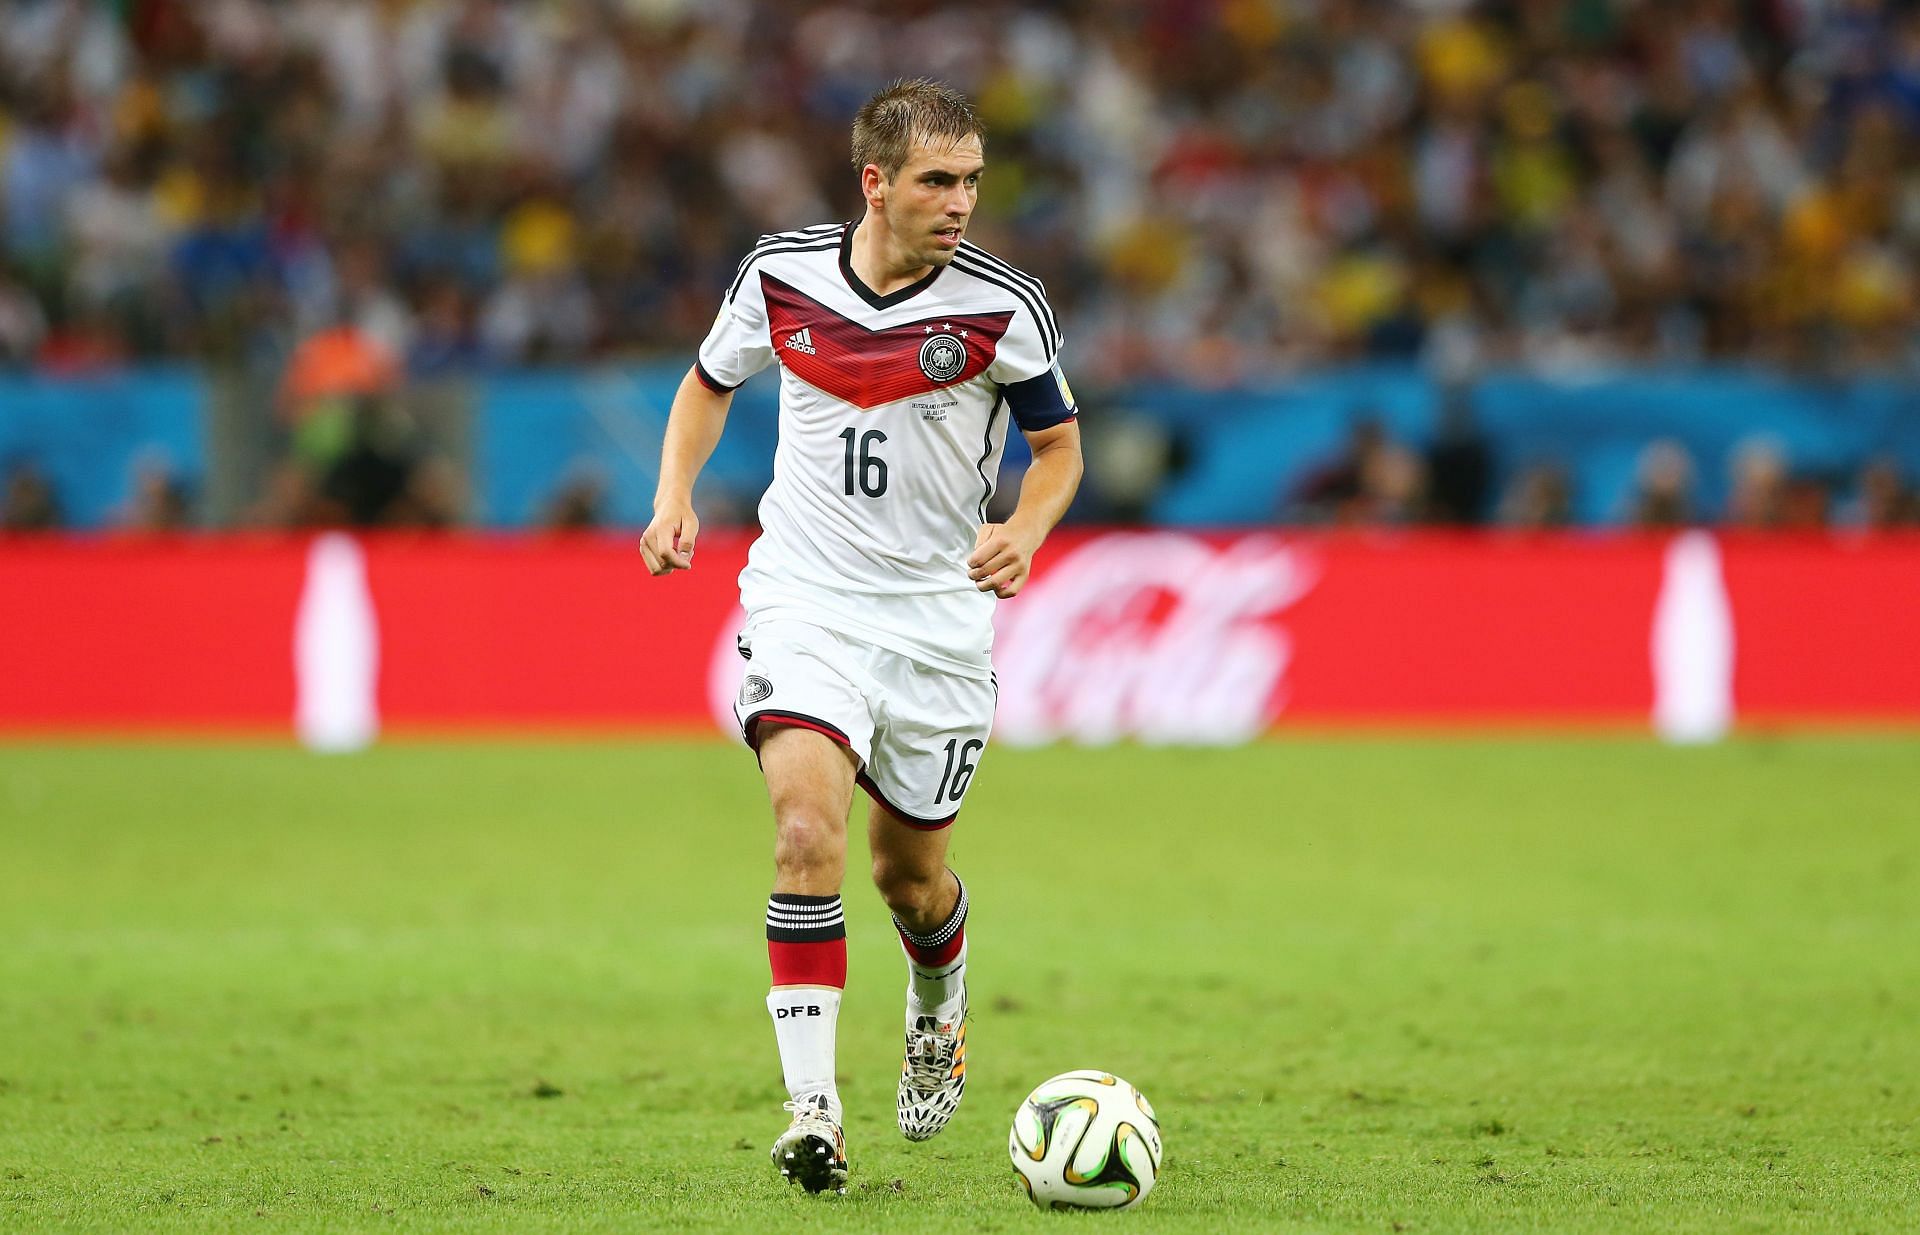 Philipp Lahm spent most of his senior playing career with Bayern Munich